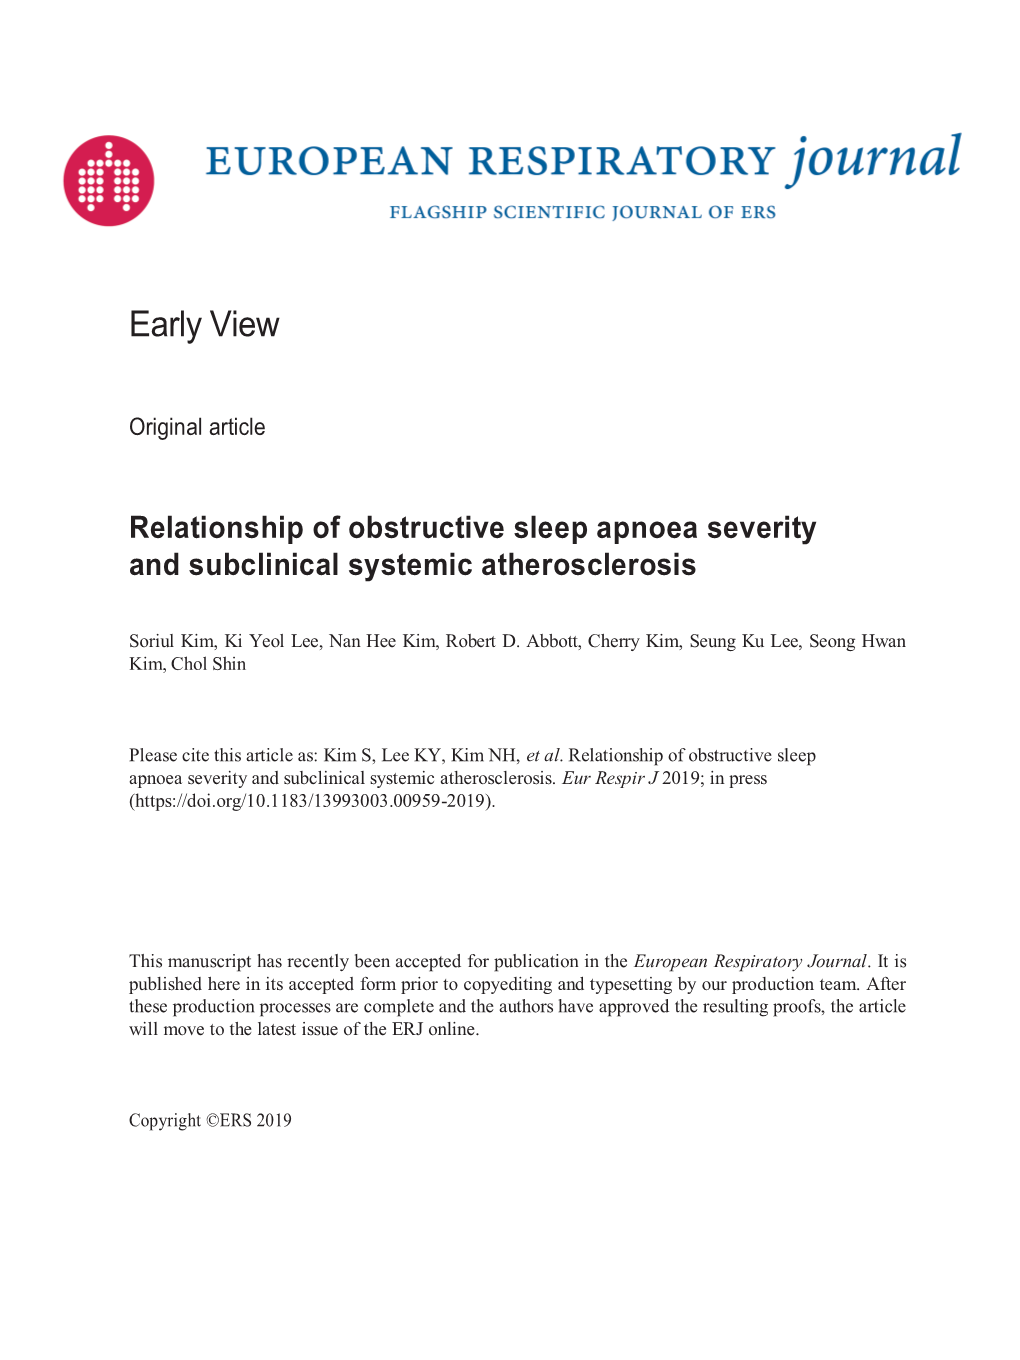 Relationship of Obstructive Sleep Apnoea Severity and Subclinical Systemic Atherosclerosis